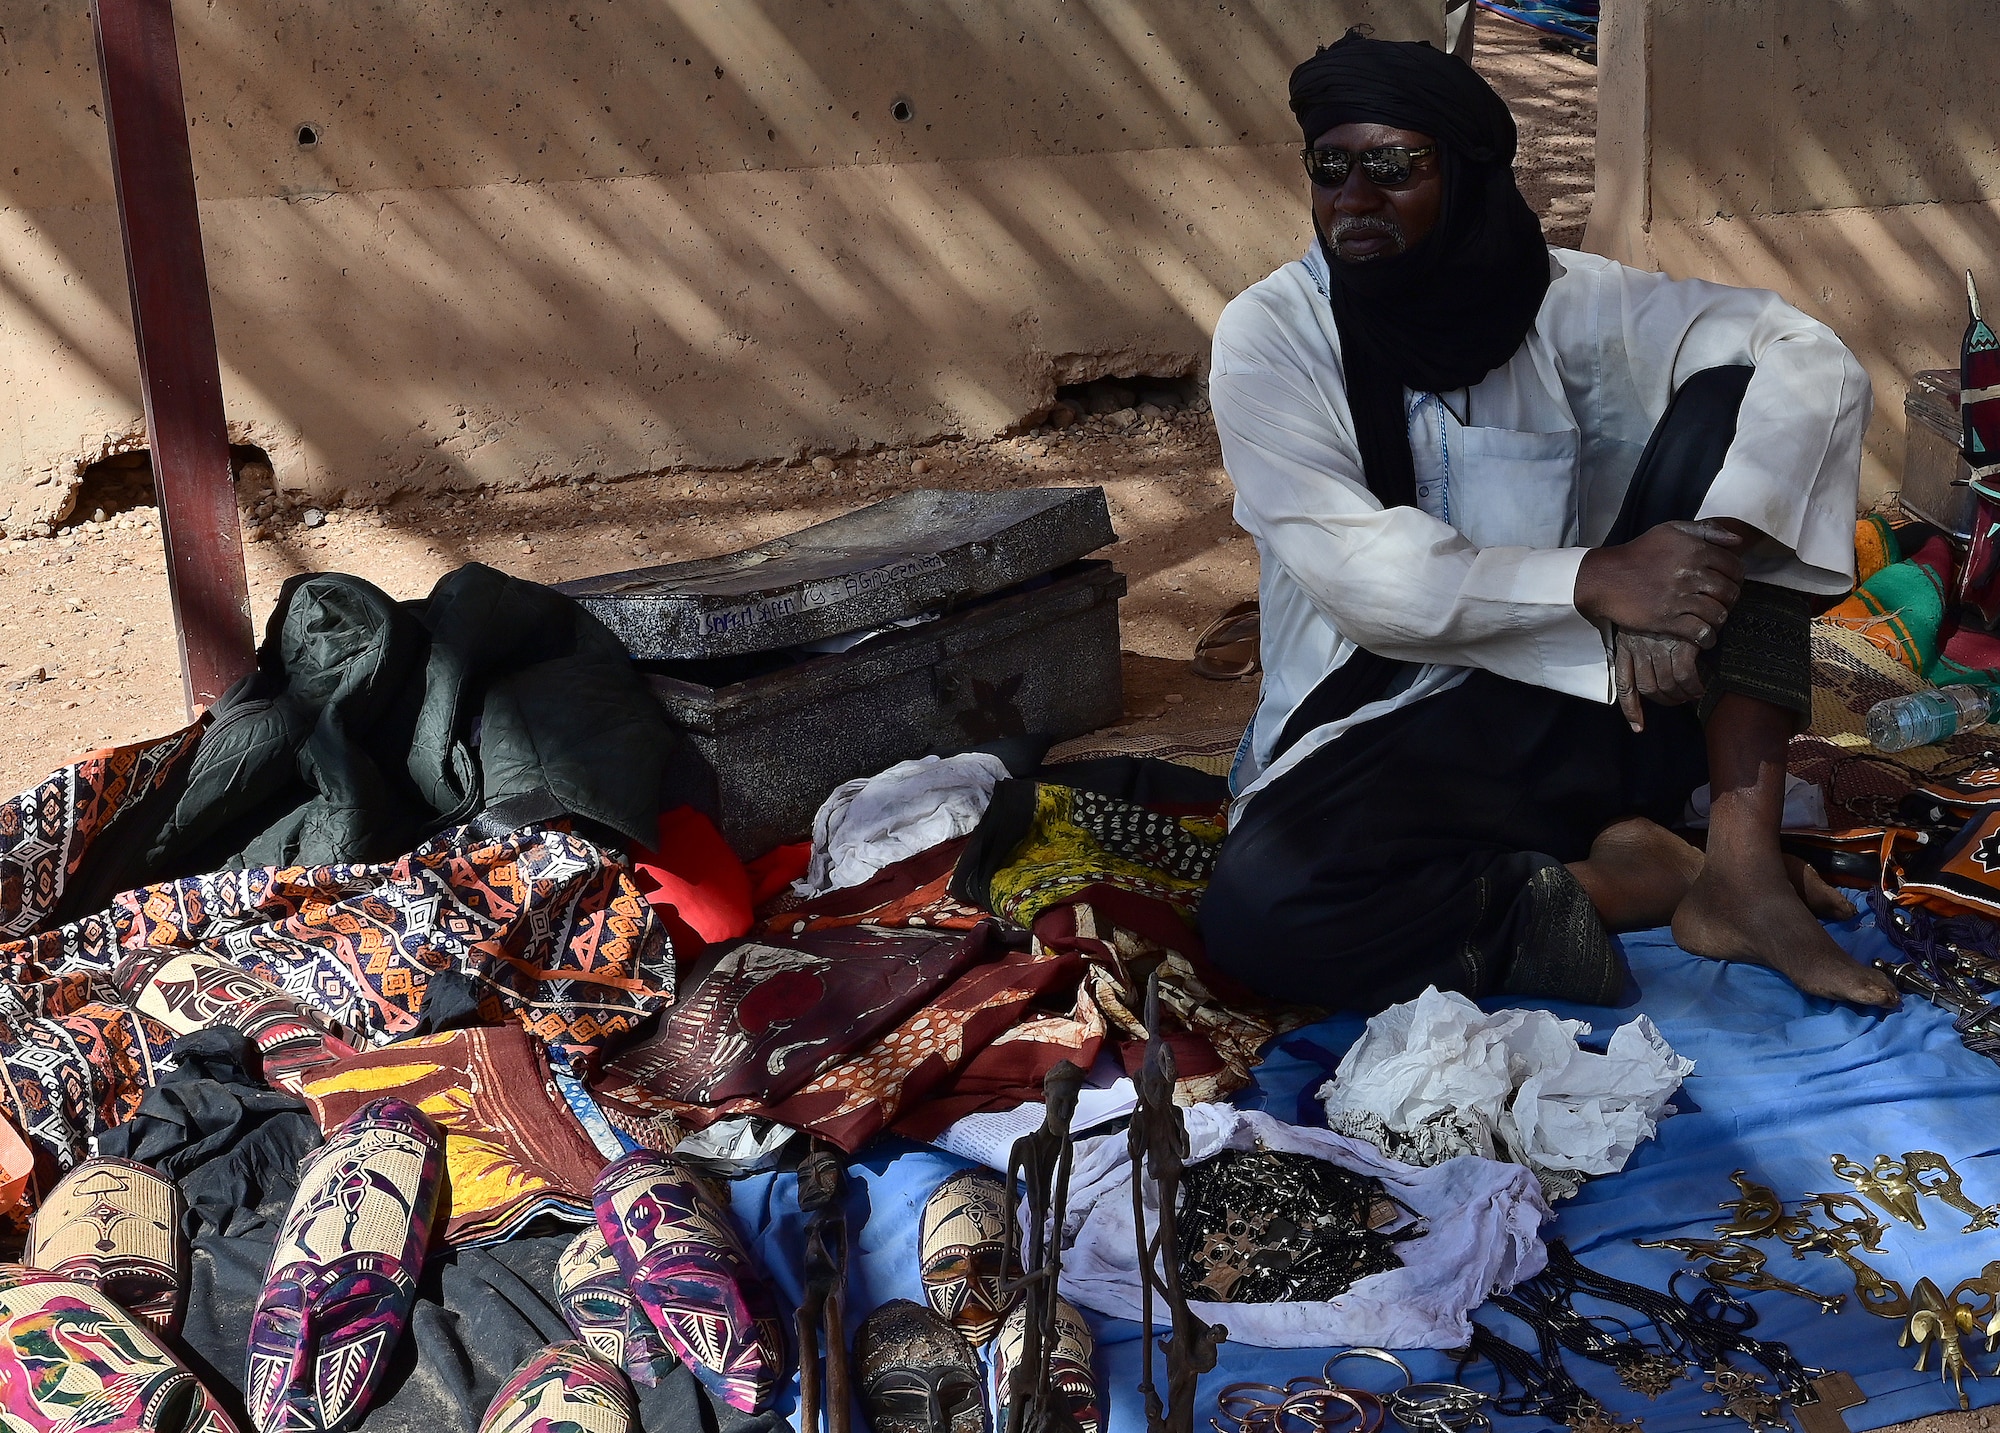 A local vendor displays his goods during a   bazaar at Nigerien Air Base 201, Agadez, Niger, Feb. 27, 2022. Over 40 local vendors from the city of Agadez and surrounding villages attended the bazaar, selling various goods. U.S. service members purchased approximately 10,532,000 West African CFA francs ($18K USD) worth of goods. Events like these enhance U.S., Niger relationships and stimulate local economic development. (U.S. Air Force photo by Tech. Sgt. Stephanie Longoria)